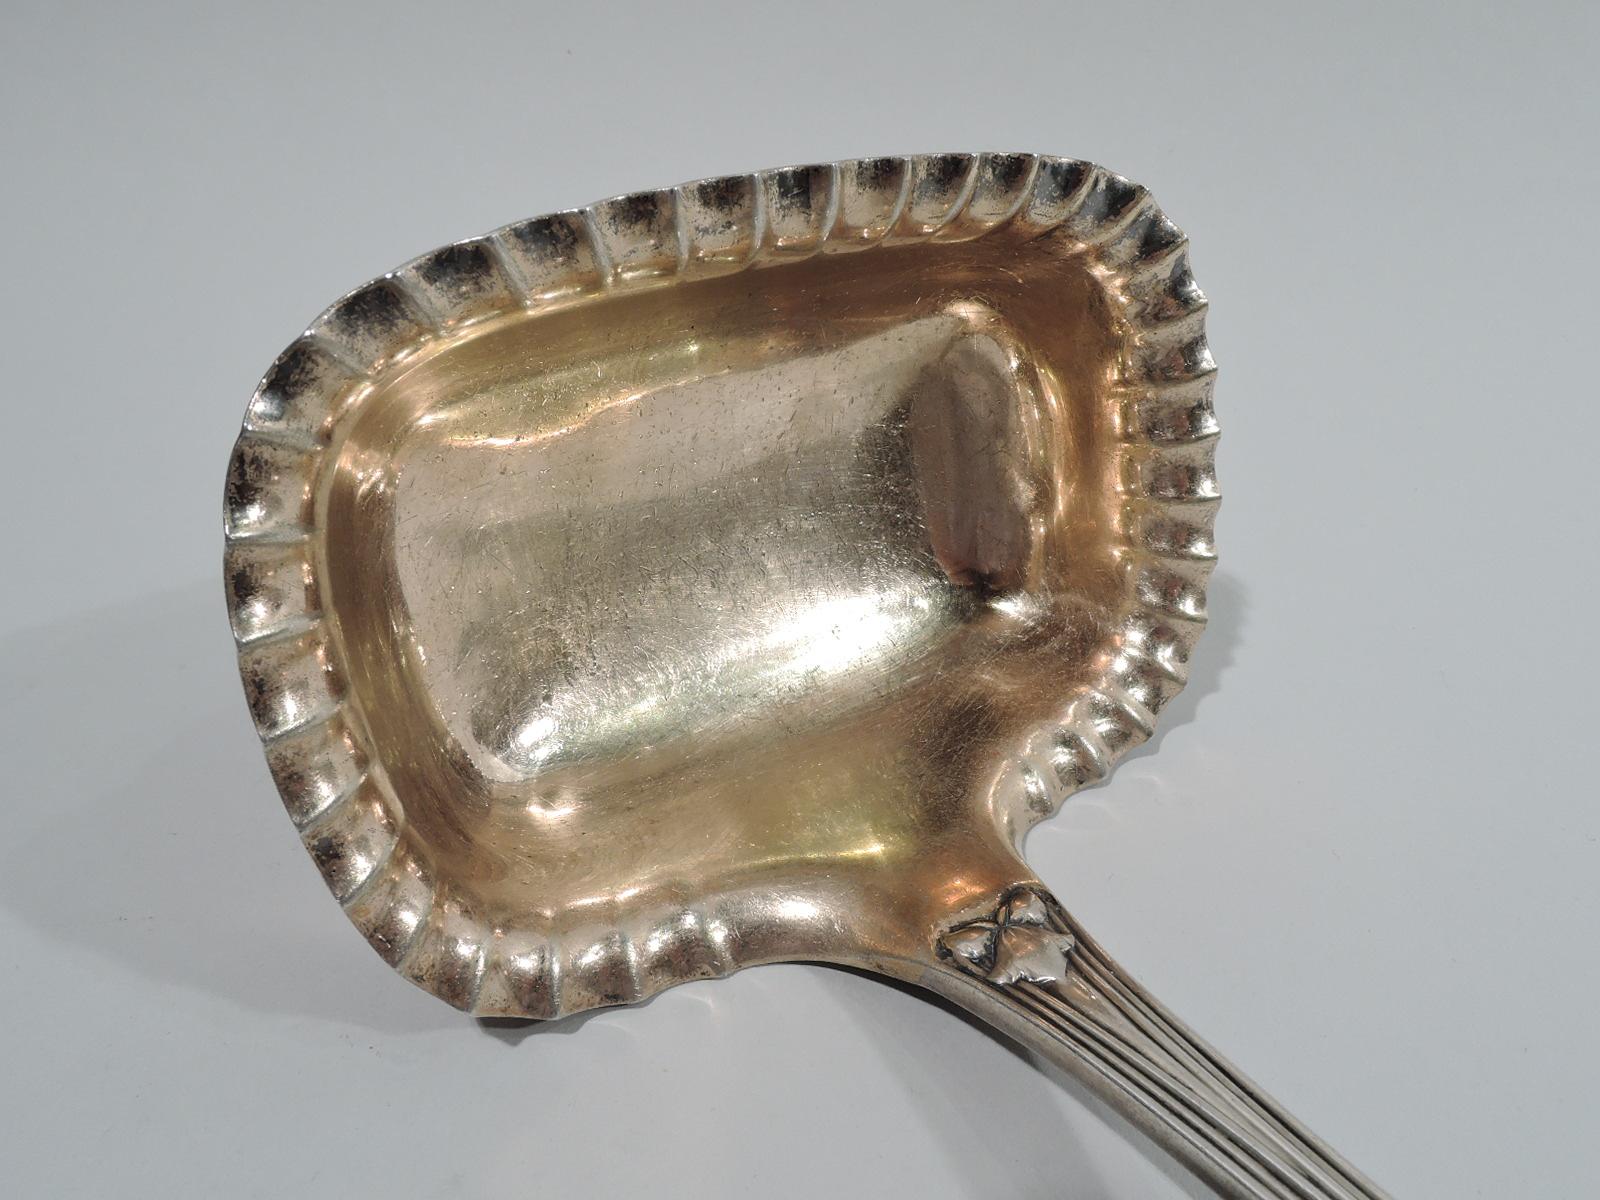 Japanese sterling silver soup ladle. Made by Tiffany & Co in New York. Oval terminal with double-sided low-relief stylized ornament: Perched bird, flowers, leafing stalks, and cattails. Interlaced monogram on verso. Reed handle. Rectangular gilt